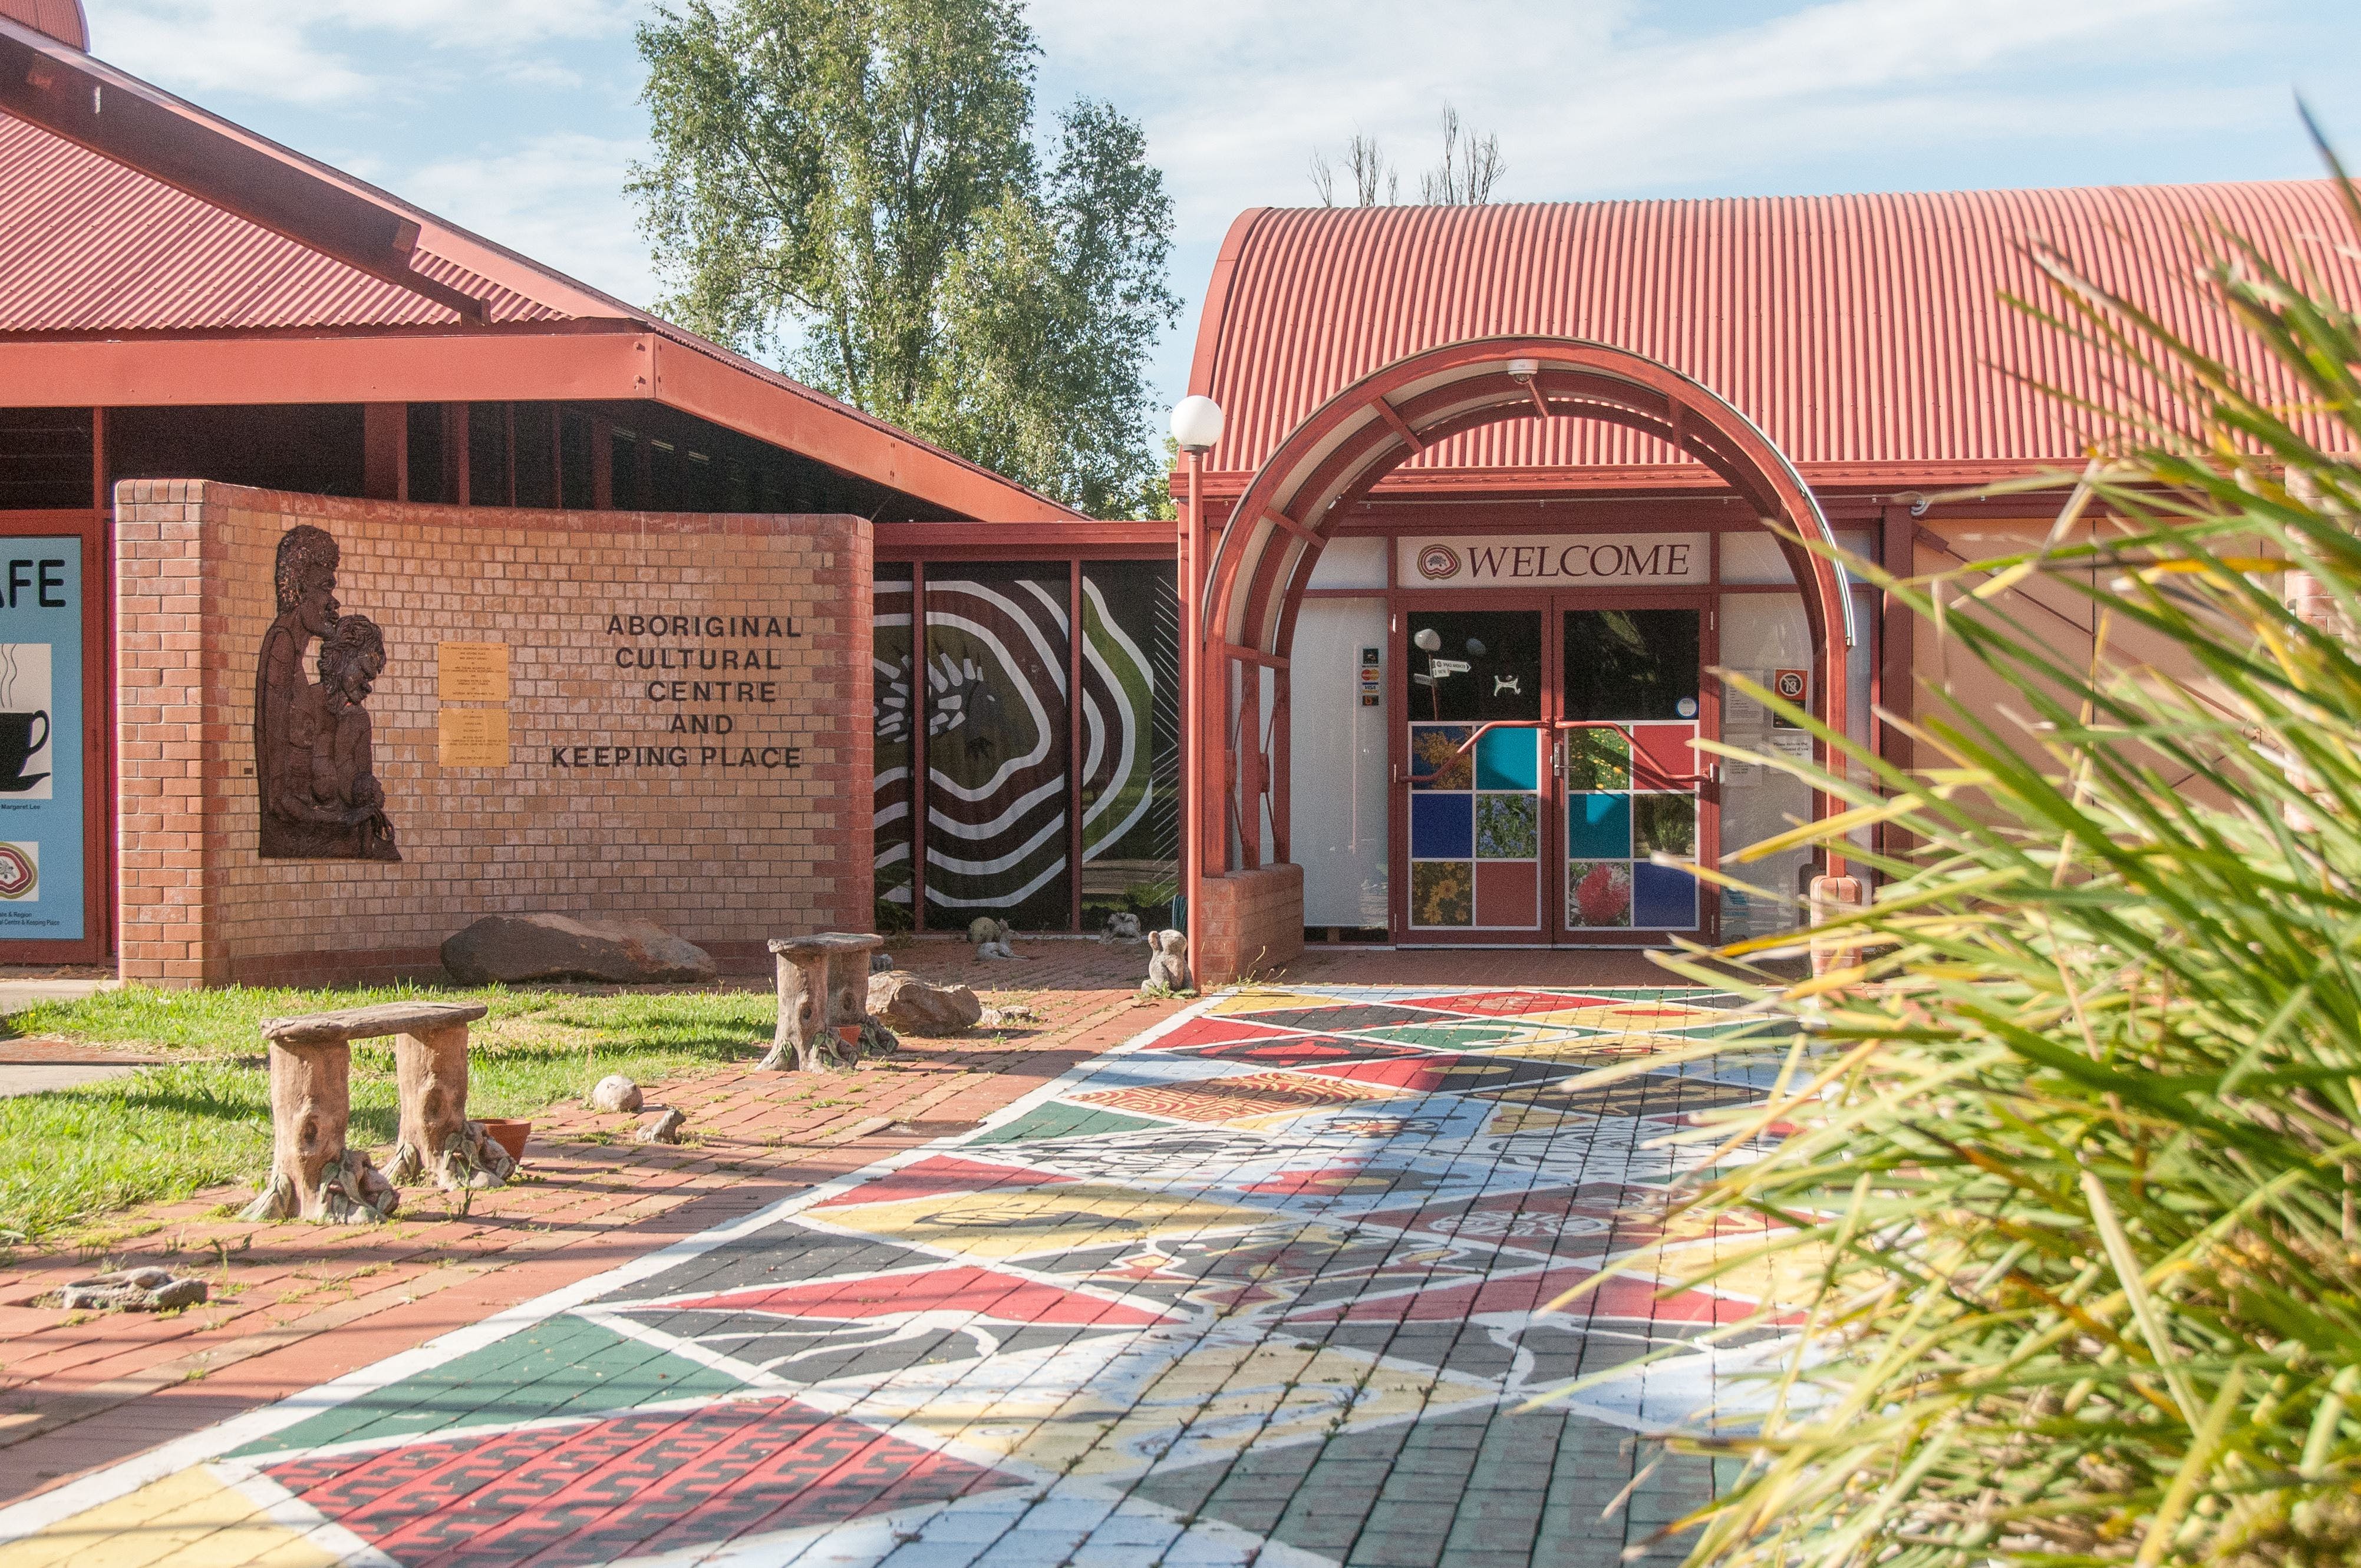 Armidale and Region Aboriginal Cultural Centre and Keeping Place - Hotel Accommodation